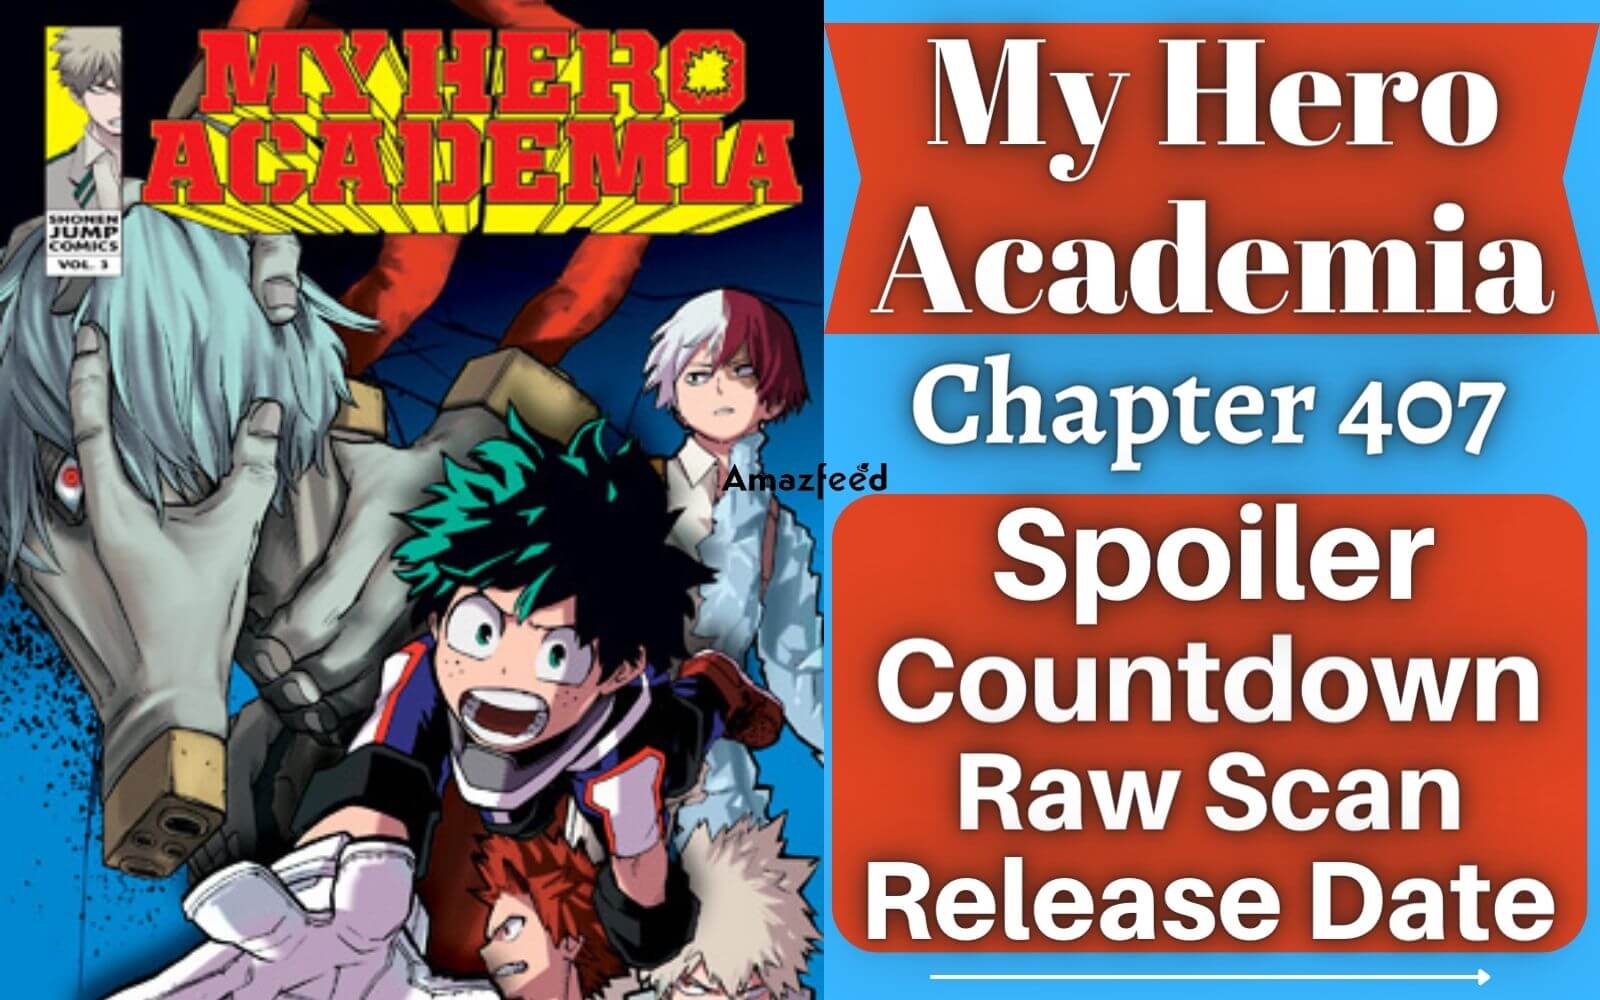 My Hero Academia Chapter 407 Raw Scans Leaks, Spoilers and Plot